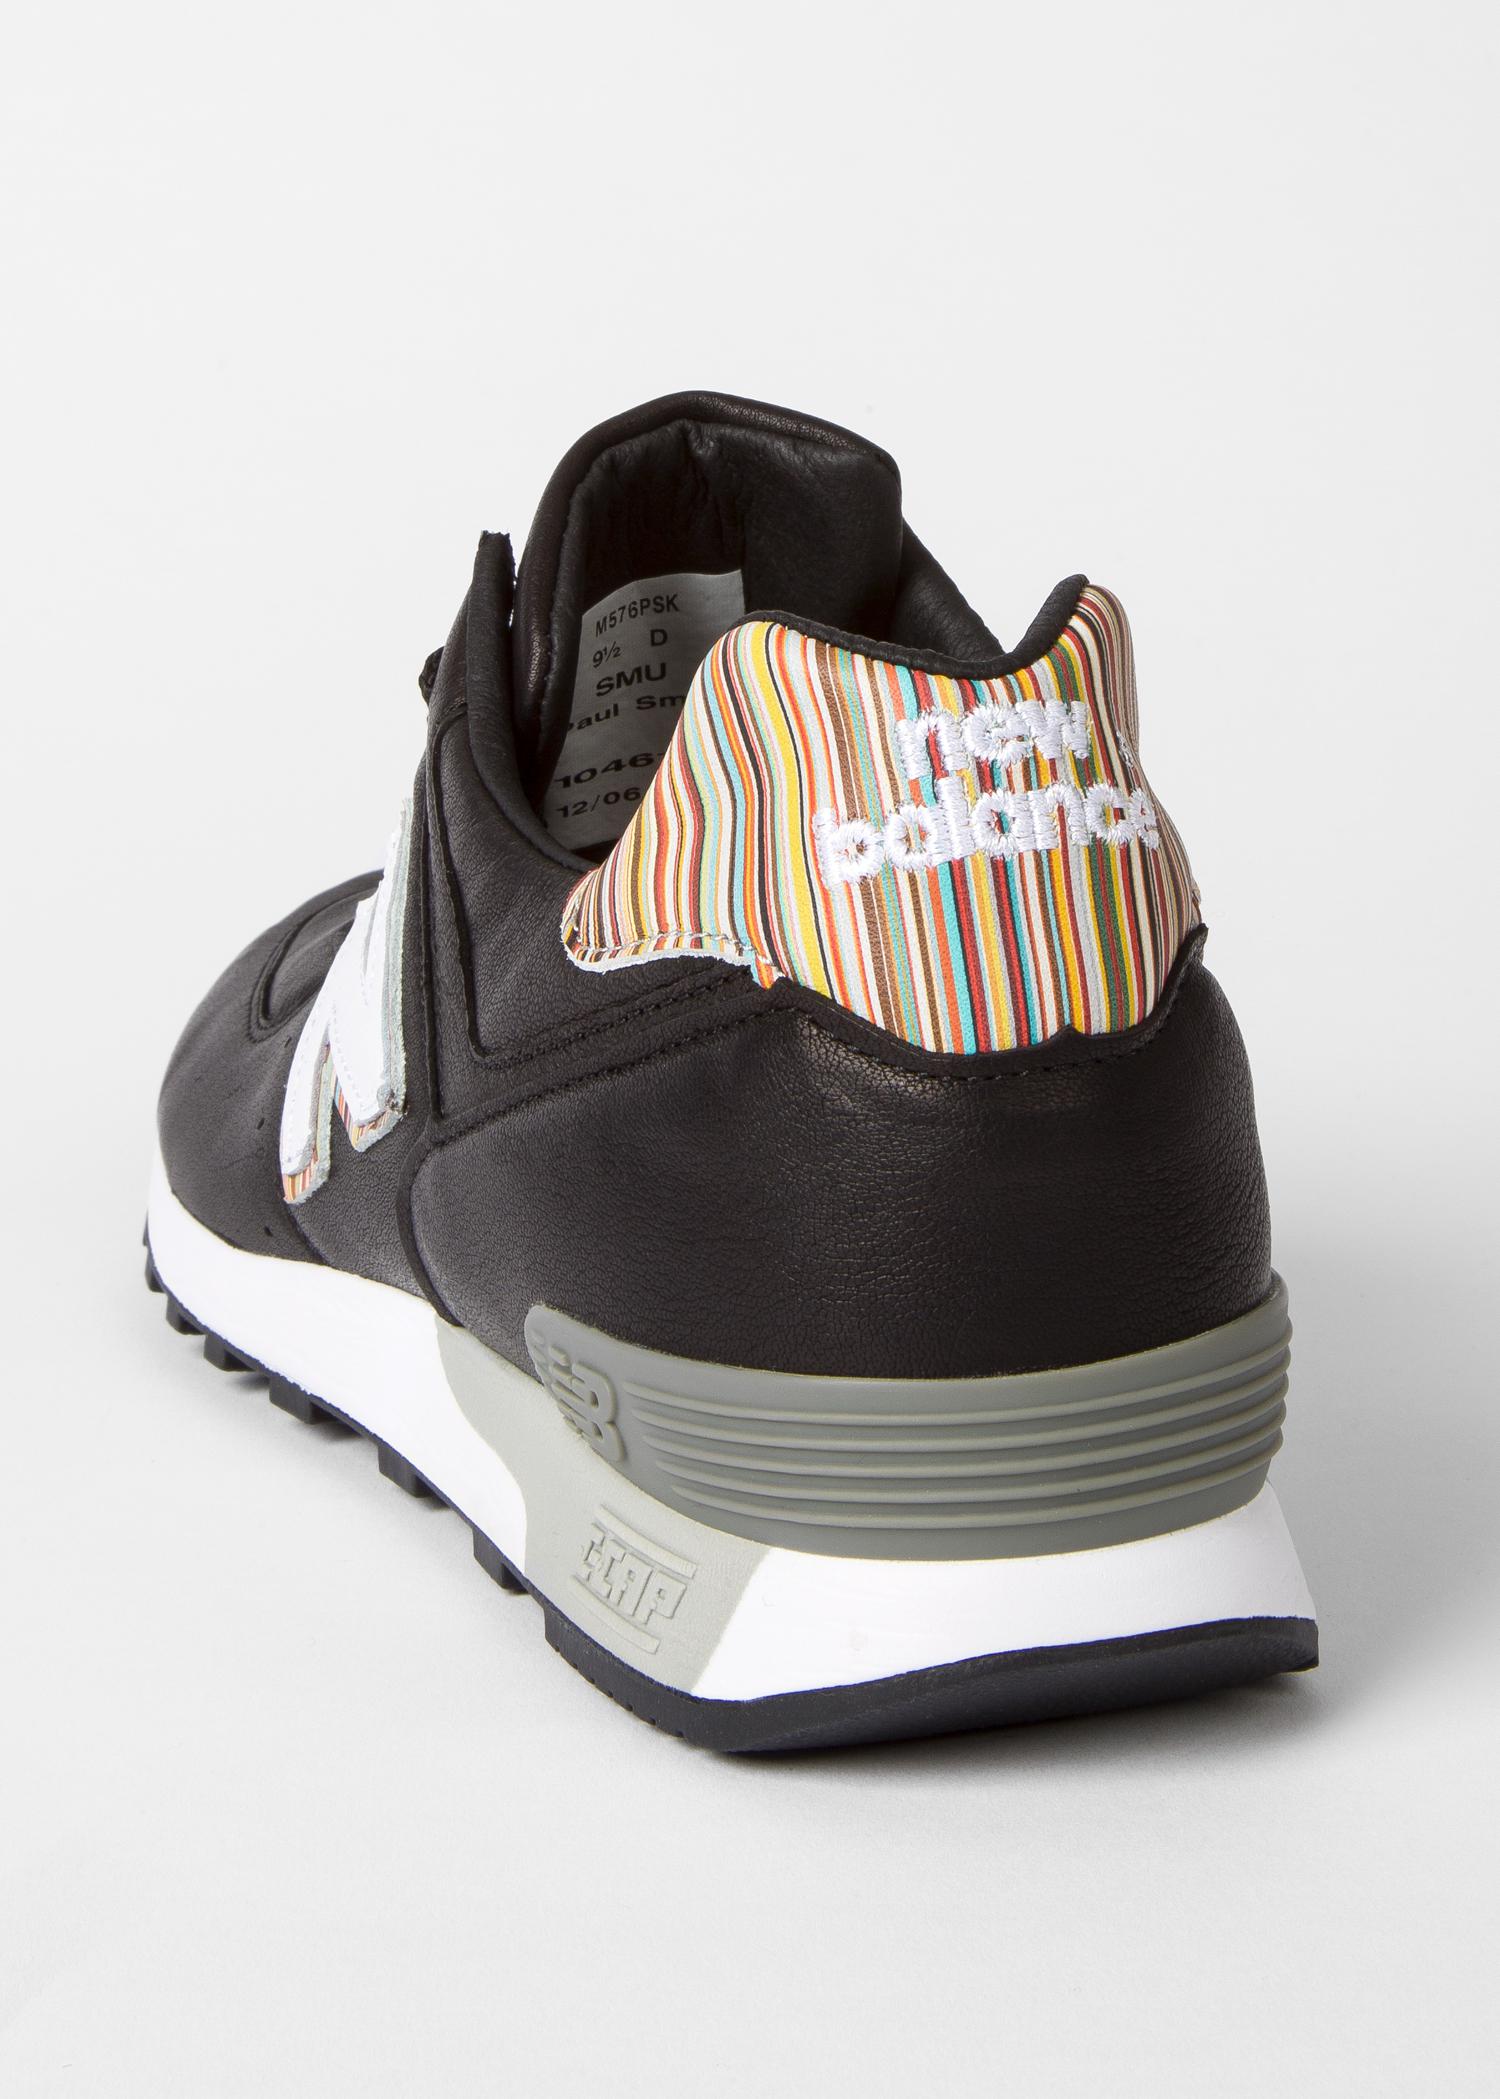 Paul Smith New Balance Trainers Online Sale, UP TO 58% OFF